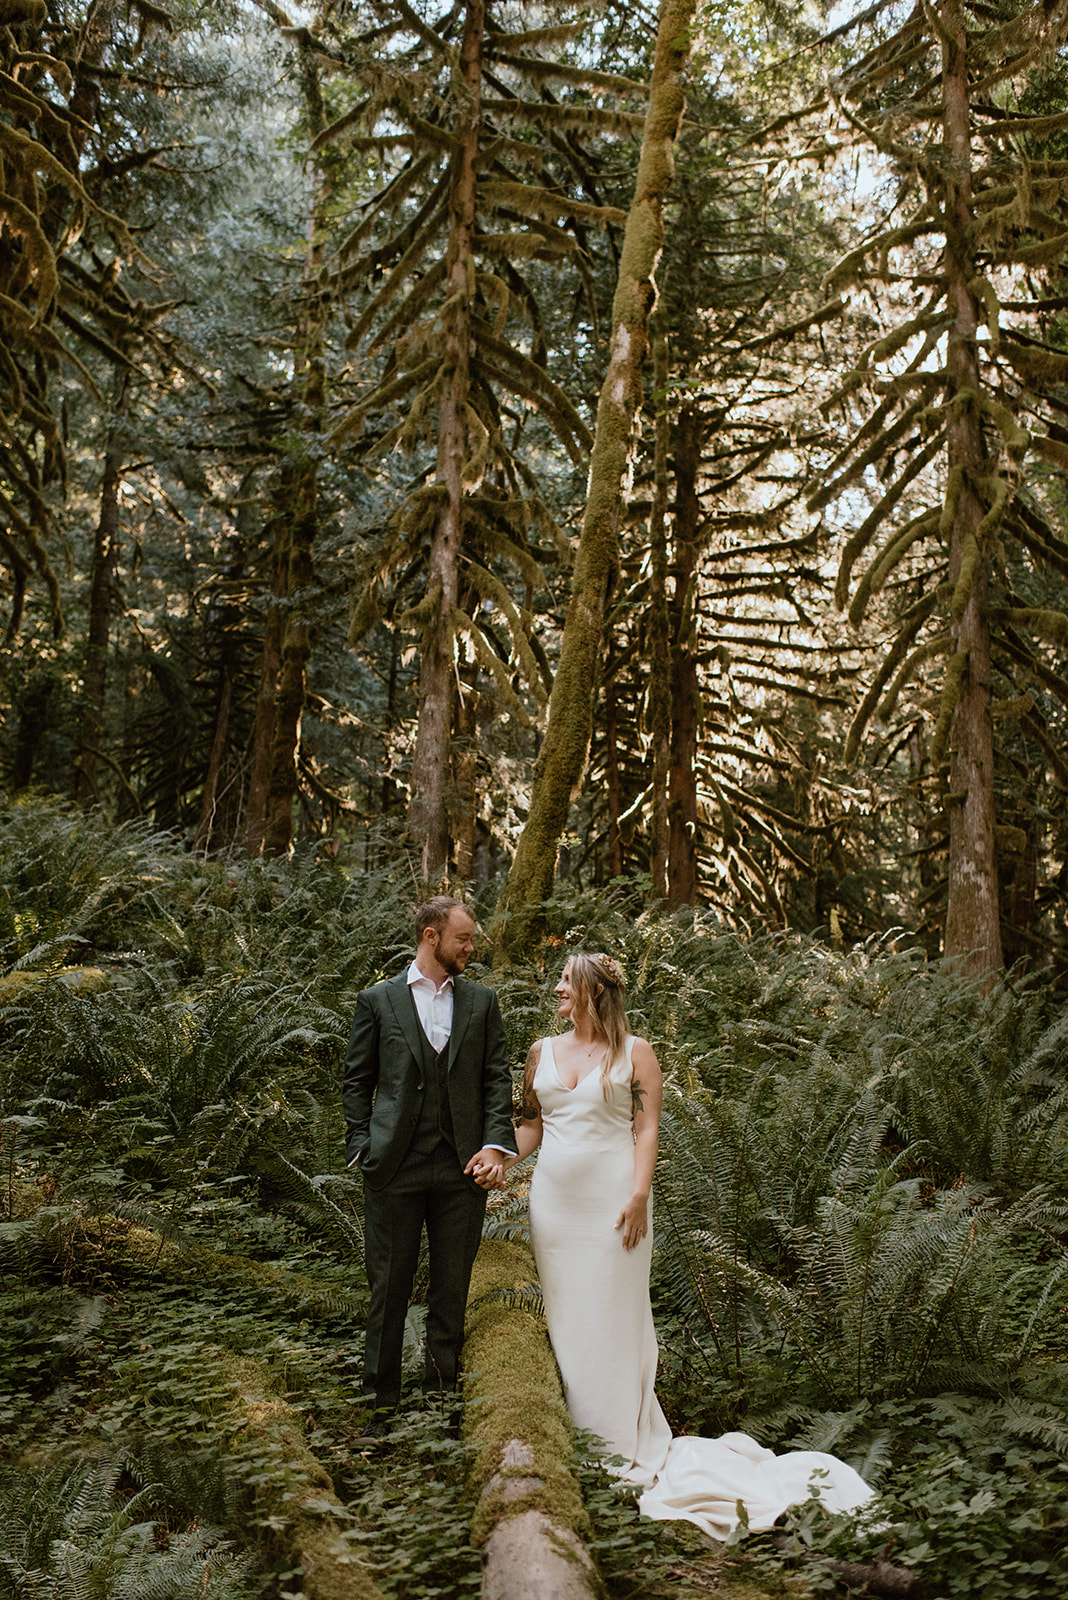 Mount Hood National Forest elopement for the adventurous bride